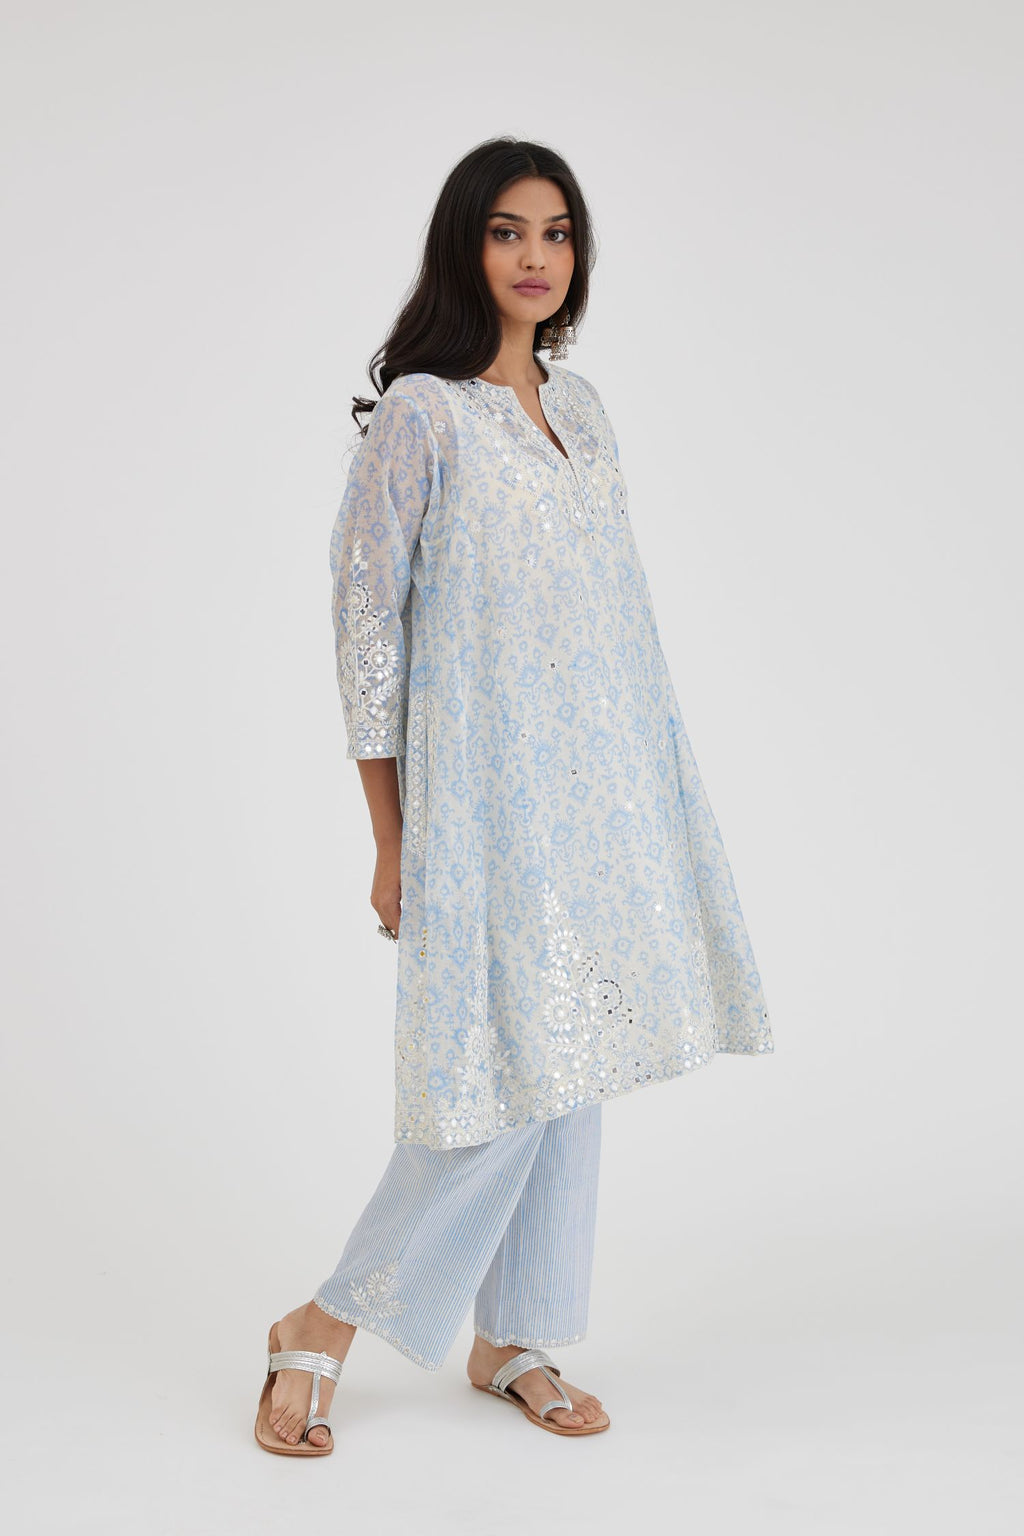 Ikat design blue and off white hand block-printed Cotton Chanderi short panelled kurta set with off-white thread and mirror embroidery.